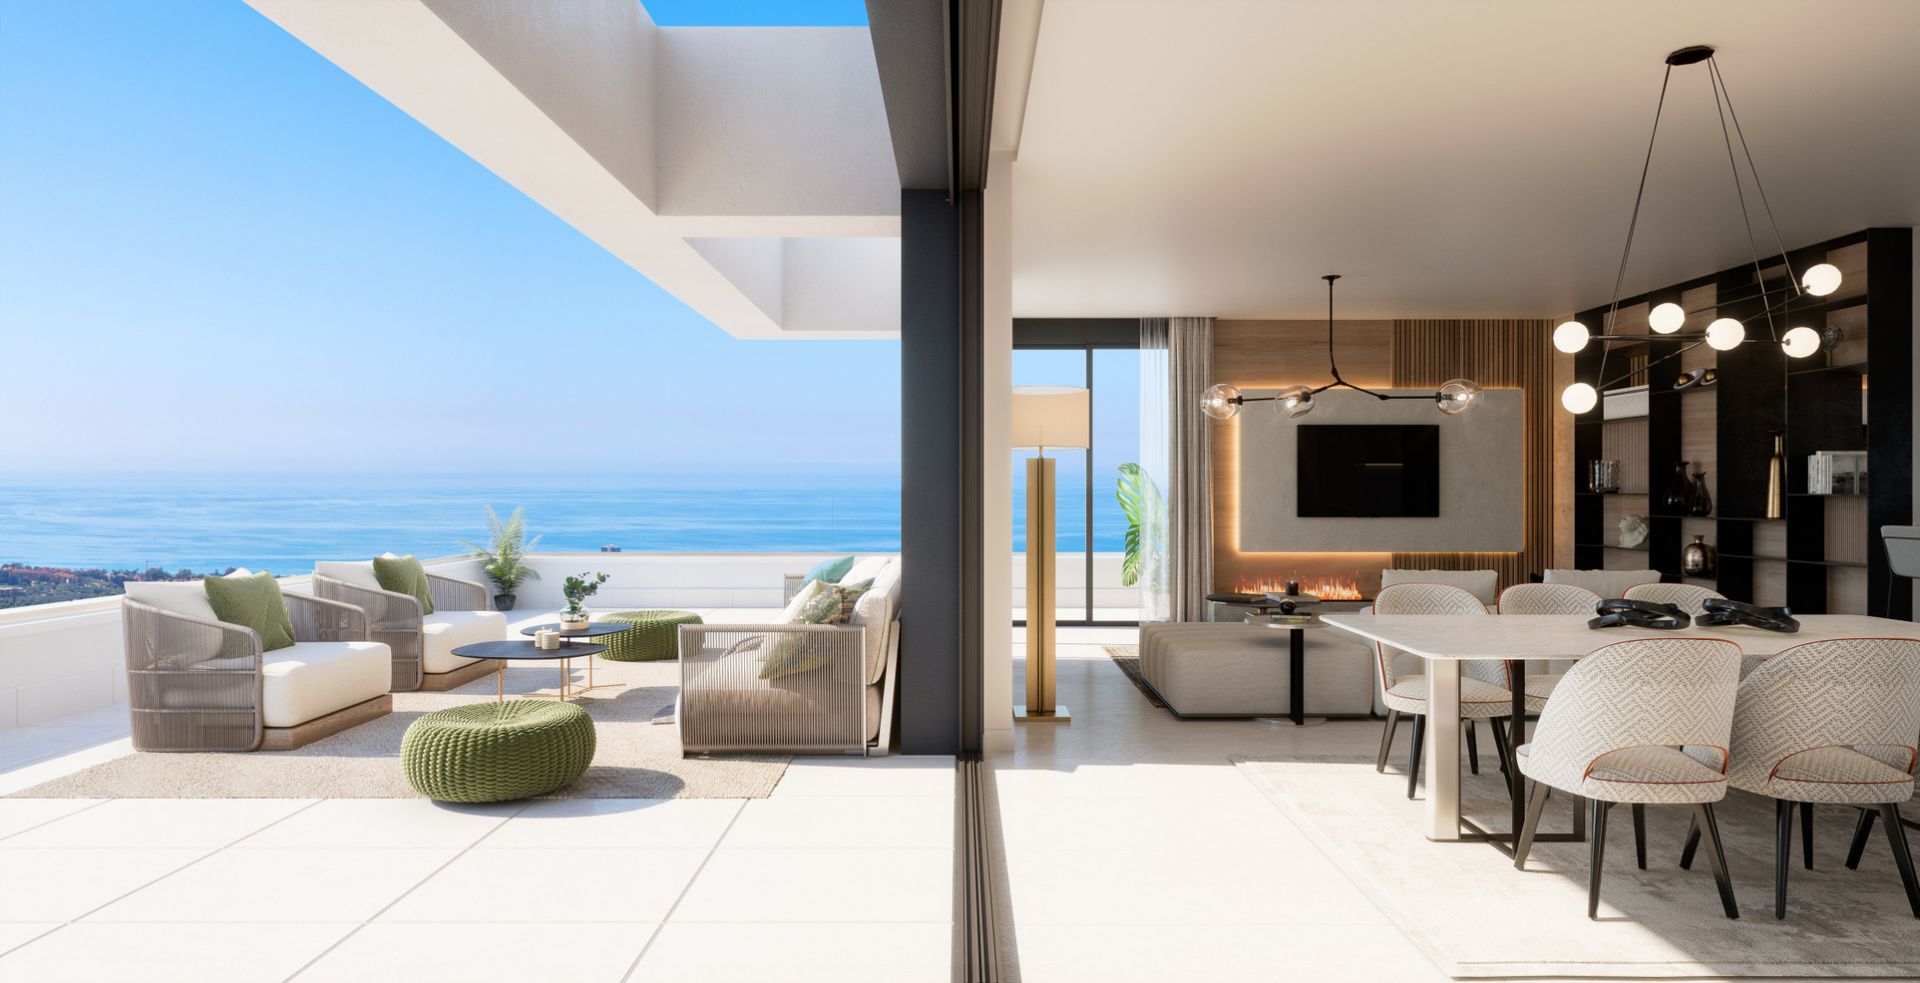 Luxury apartments and penthouses with stunning panoramic views | Engel & Völkers Marbella